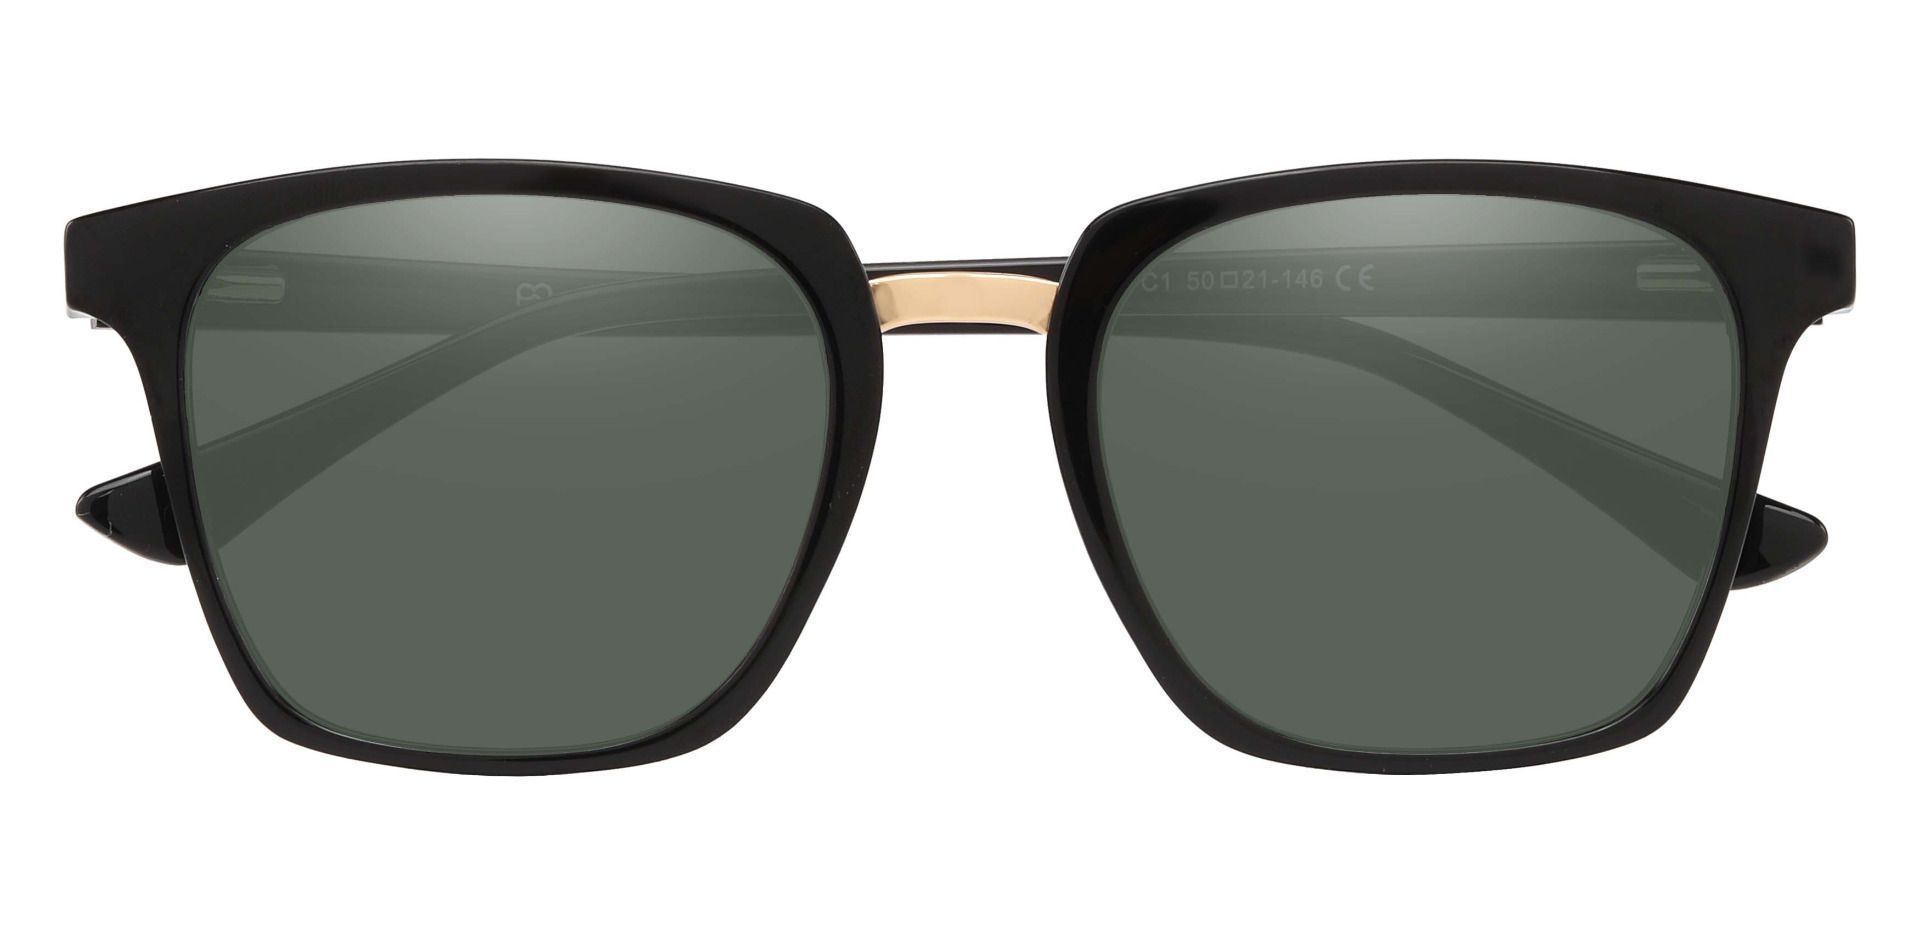 Delta Square Lined Bifocal Sunglasses - Black Frame With Green Lenses